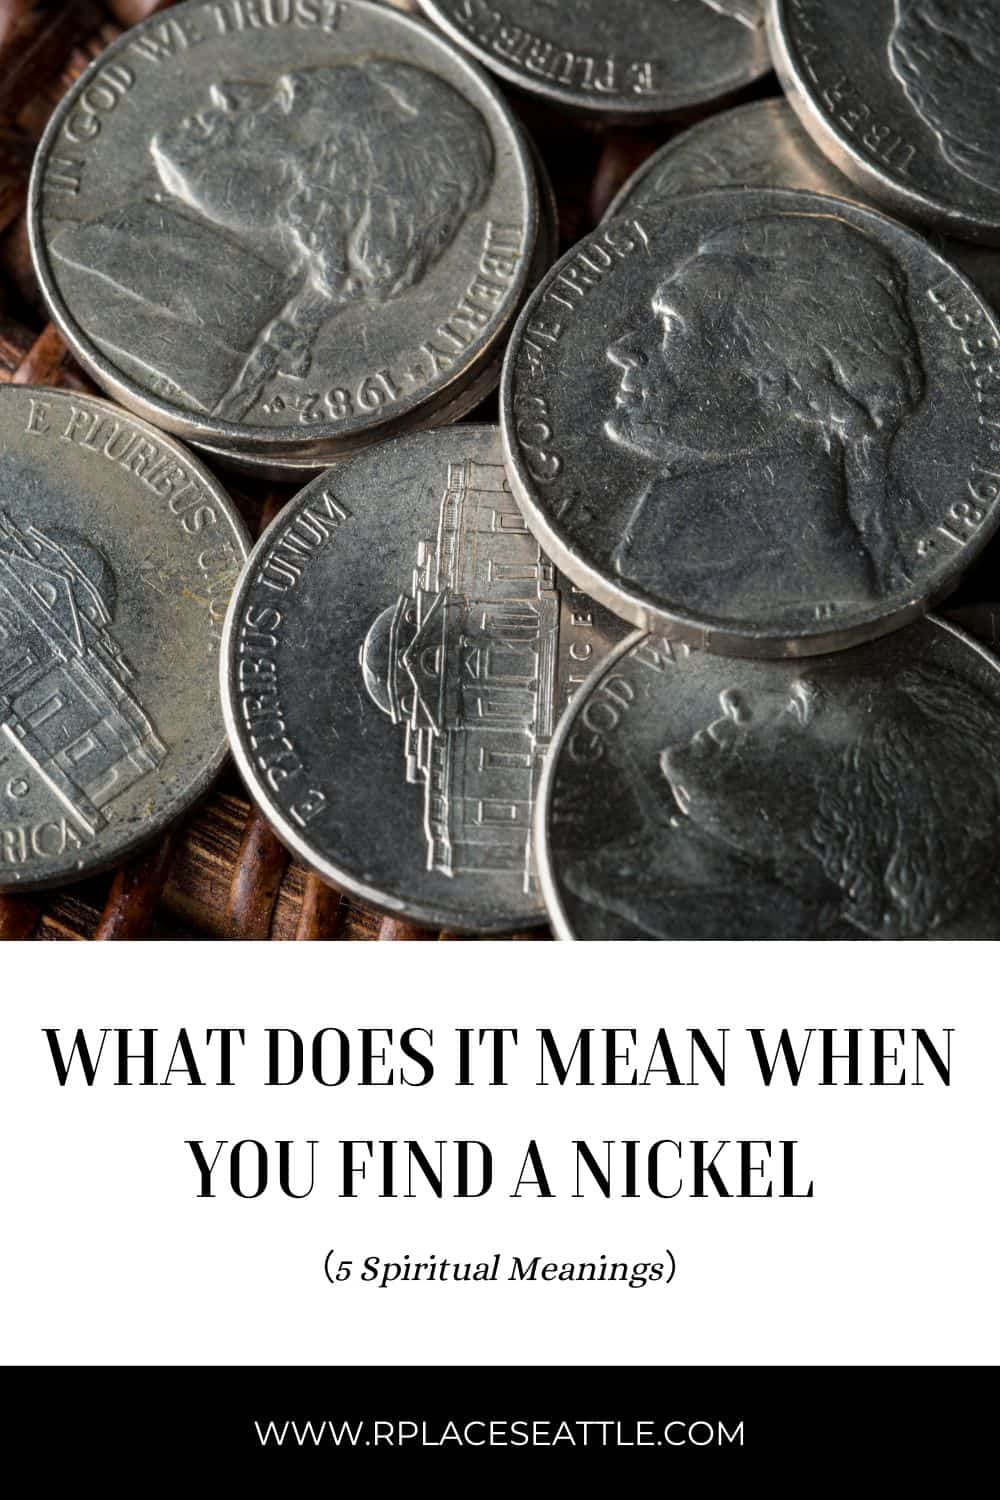 What Actions Should You Take After Finding Pennies?